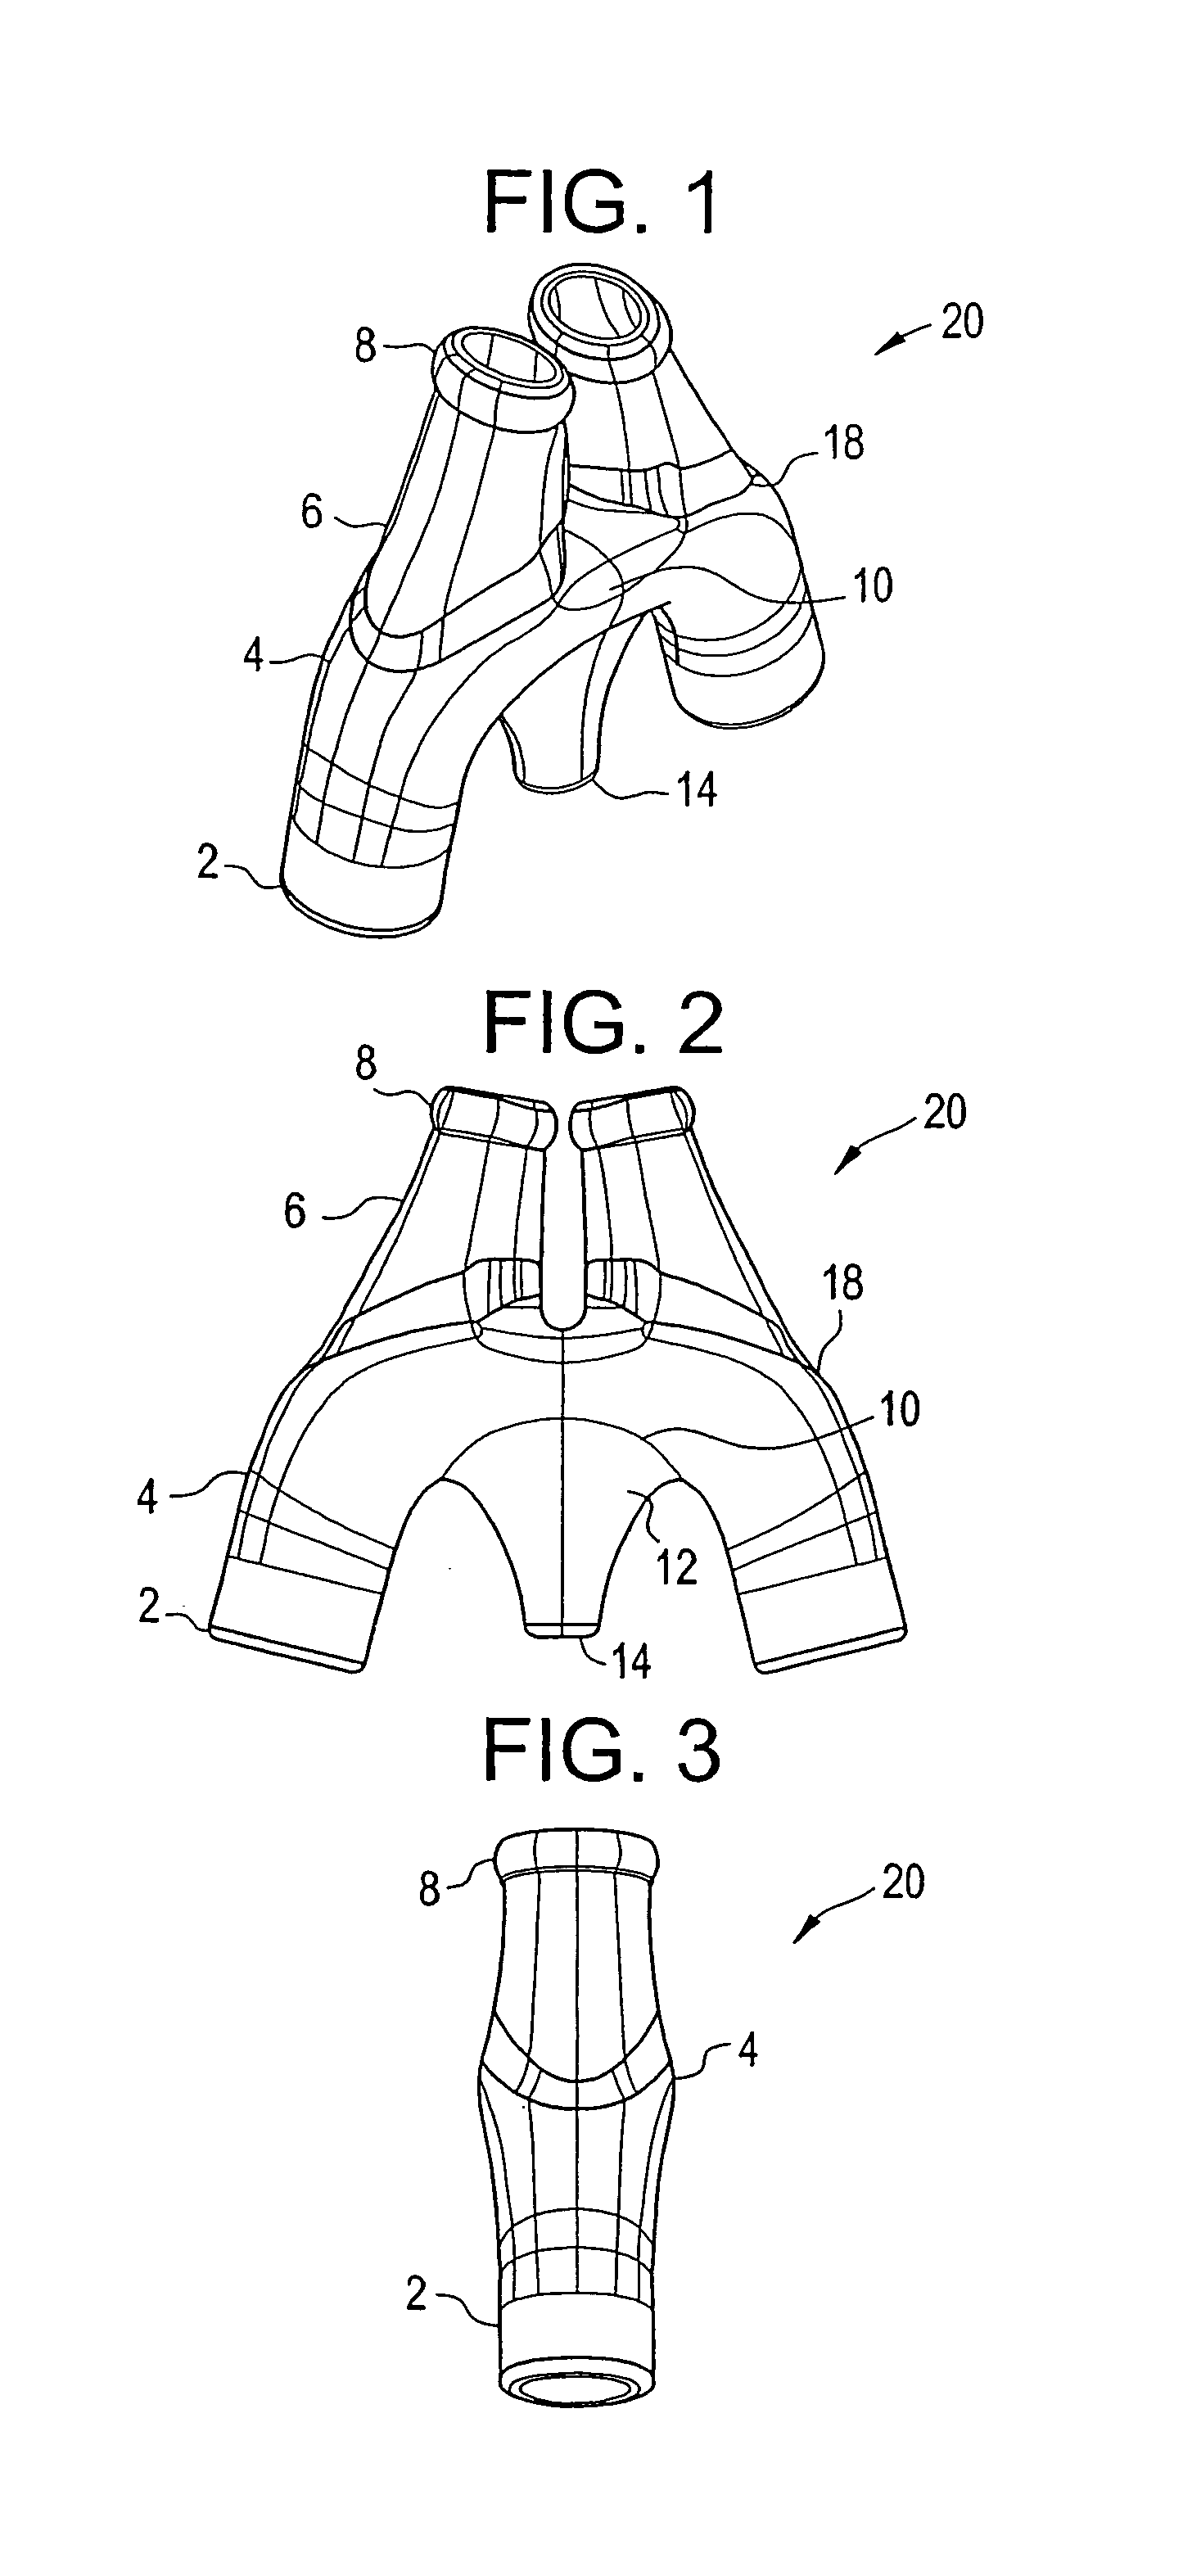 Nasal ventilation interface and system